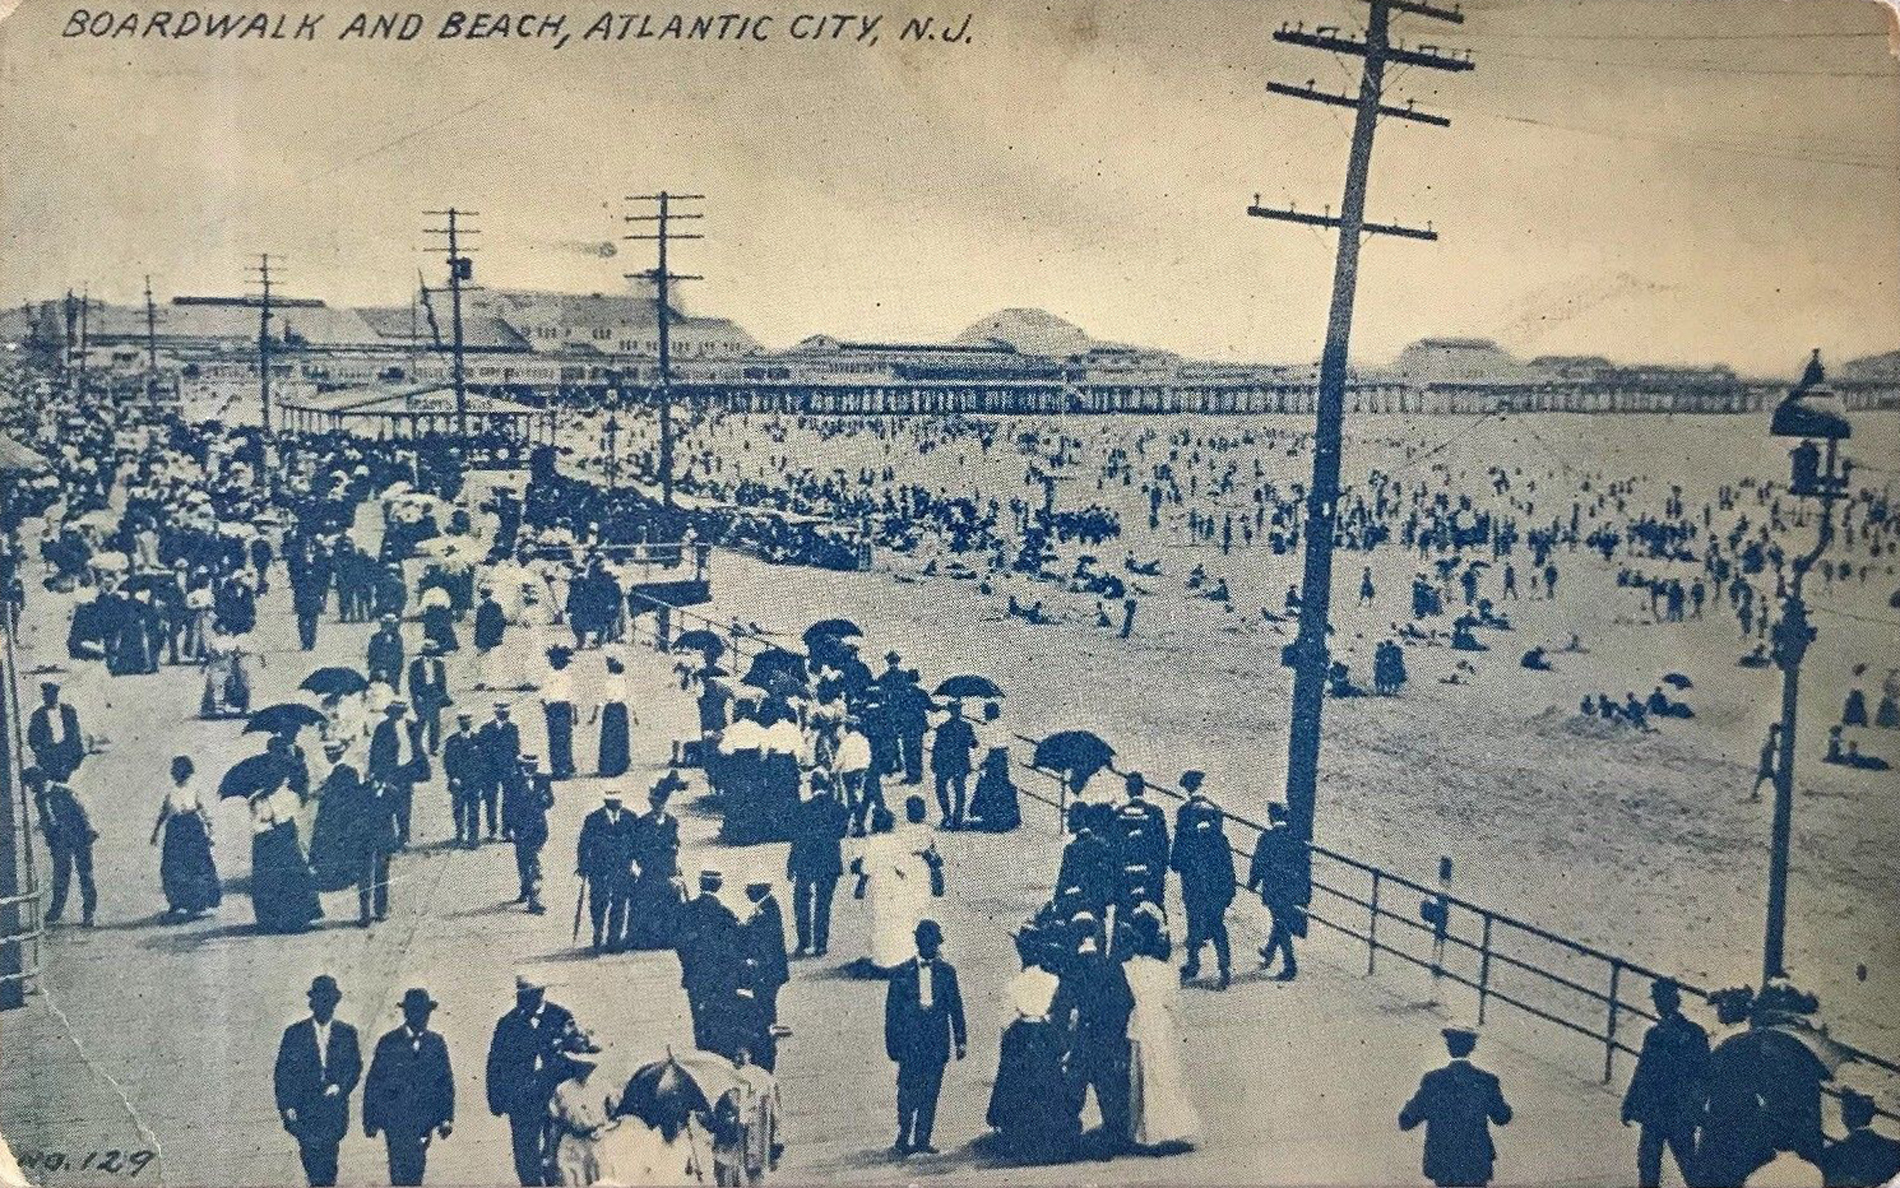 Atlantic City - Boardwalk and Beach by day - 1910s